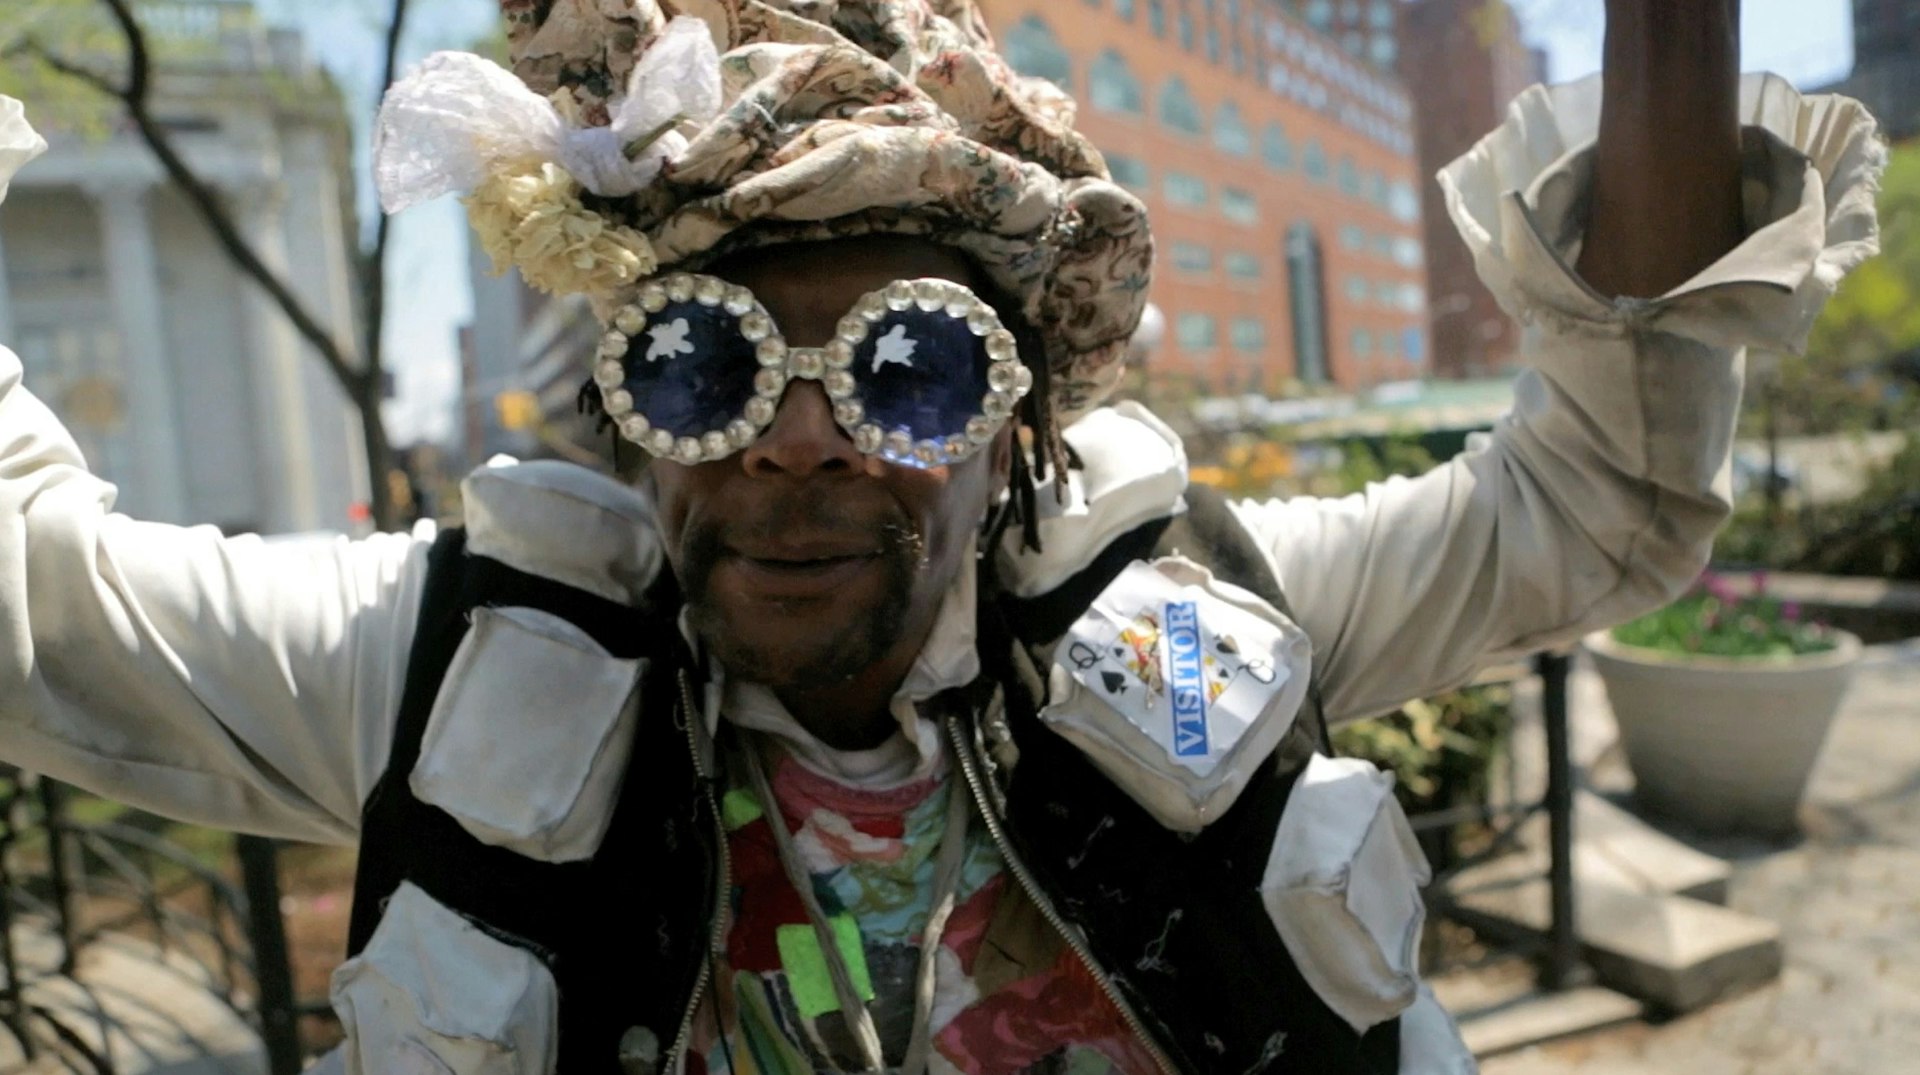 Are New York’s eccentric street characters being pushed out?